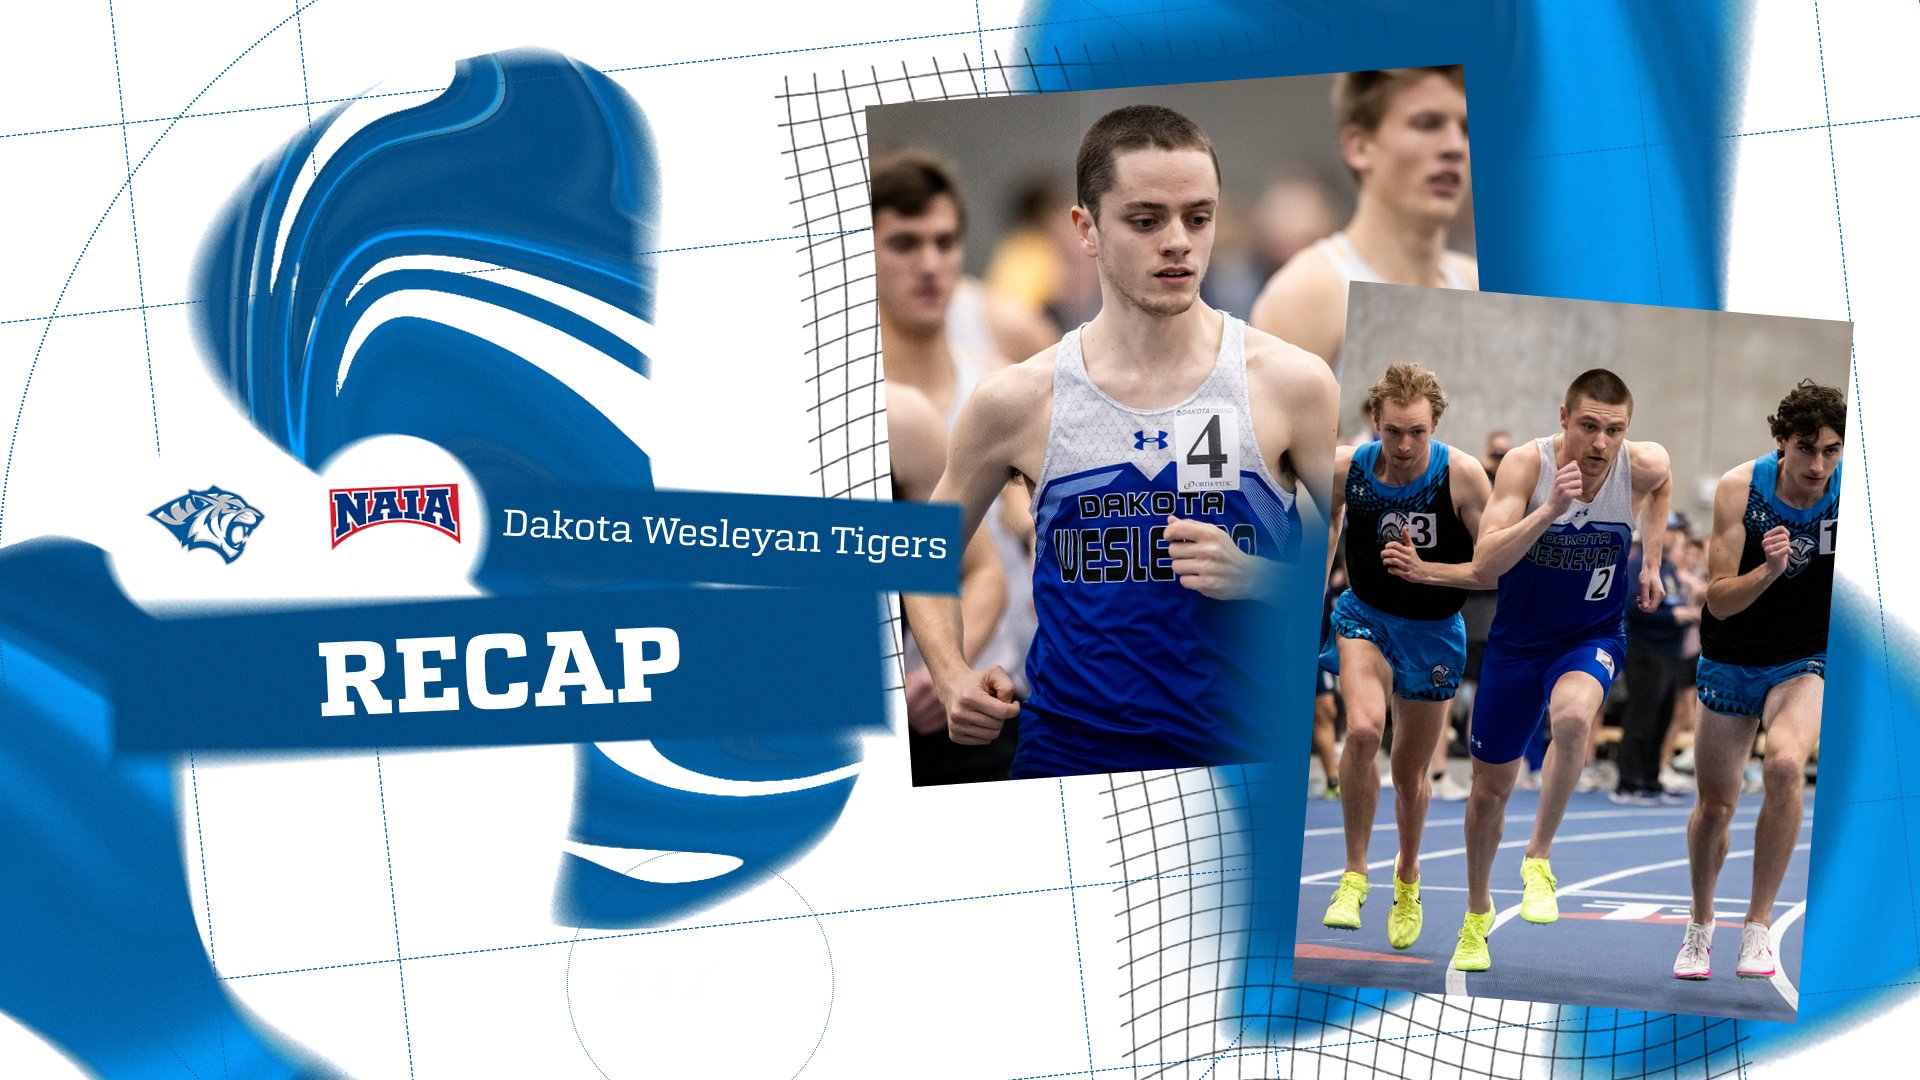 DAY ONE RECAP FOR DWU TRACK & FIELD AT NATIONAL CHAMPIONSHIPS